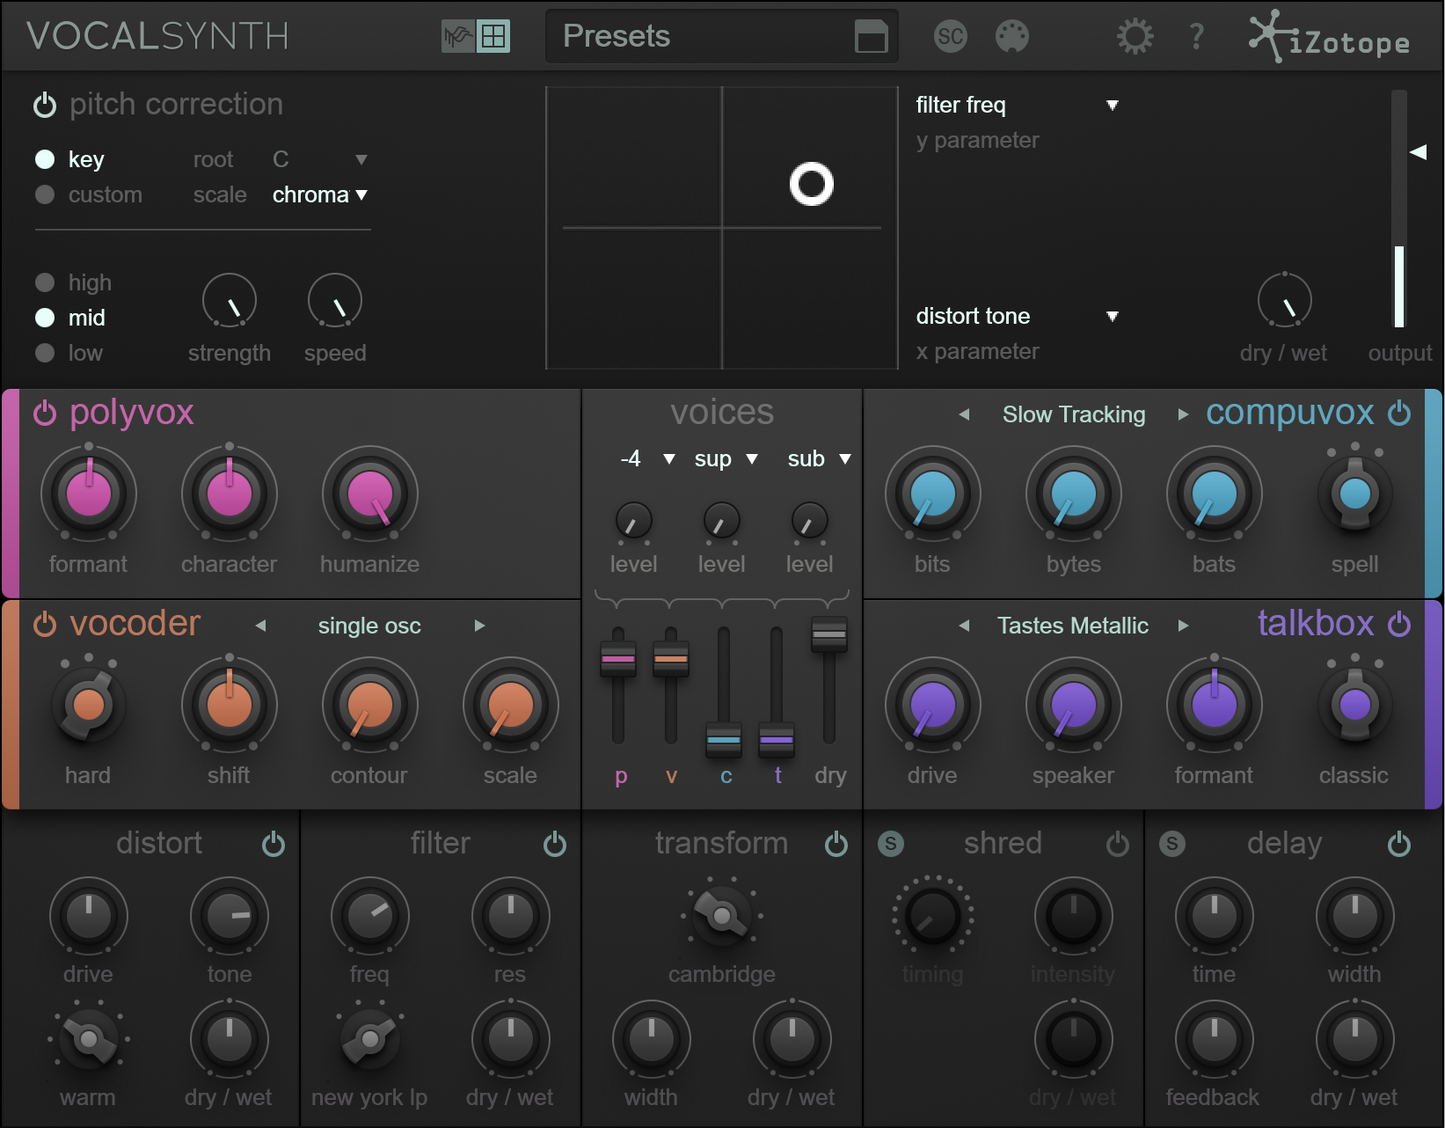 iZotope VocalSynth 2 Vocal Effects Plug-in